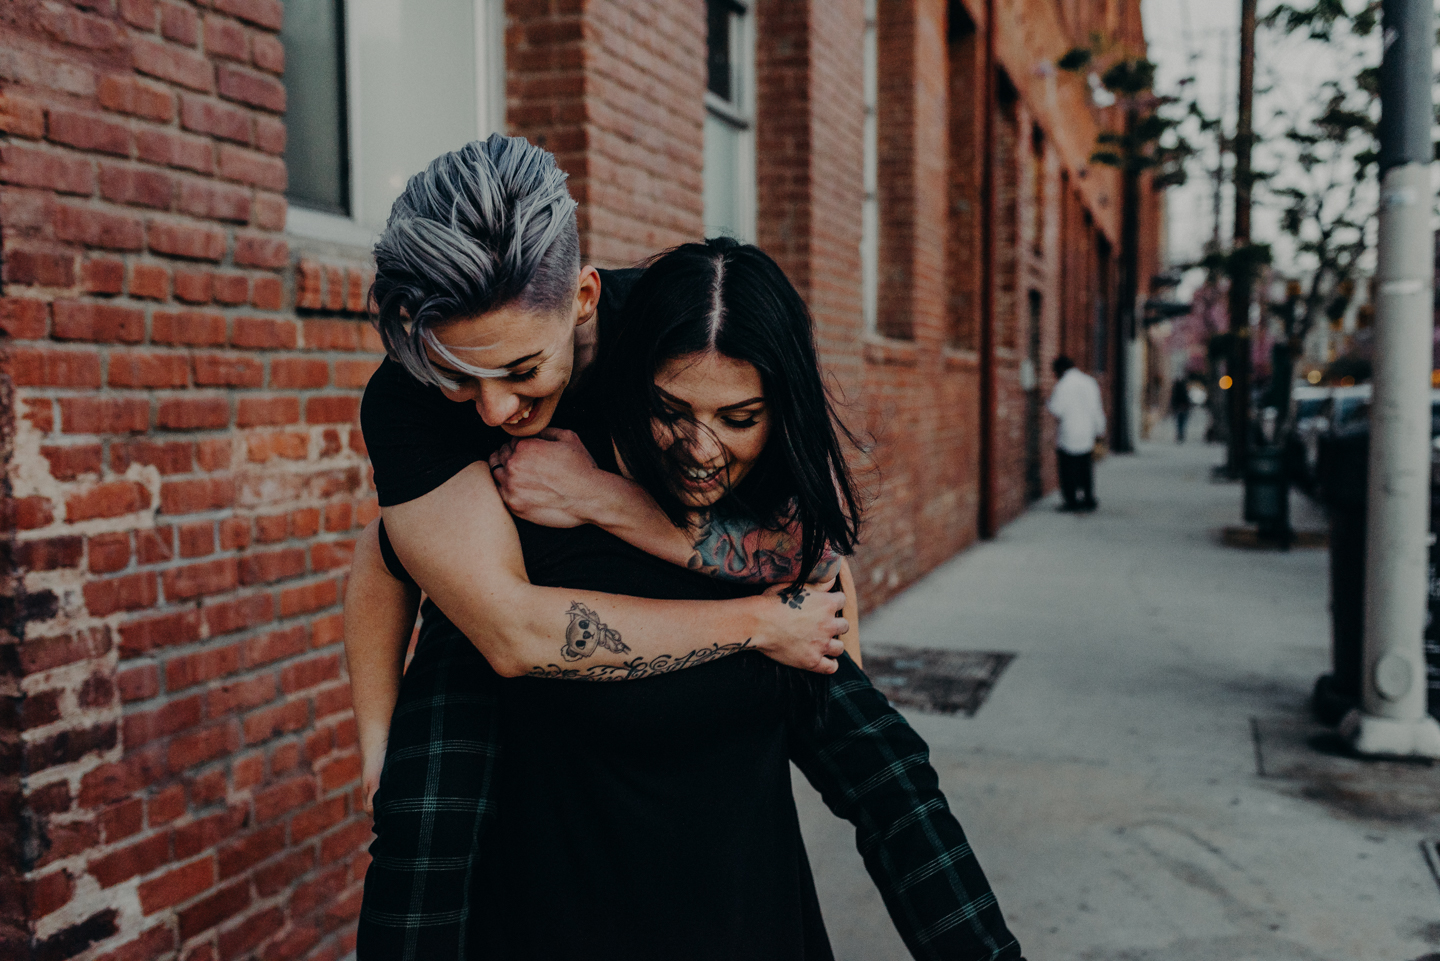 queer wedding photographer in los angeles - lesbian engagement session los angeles - isaiahandtaylor.com-039.jpg